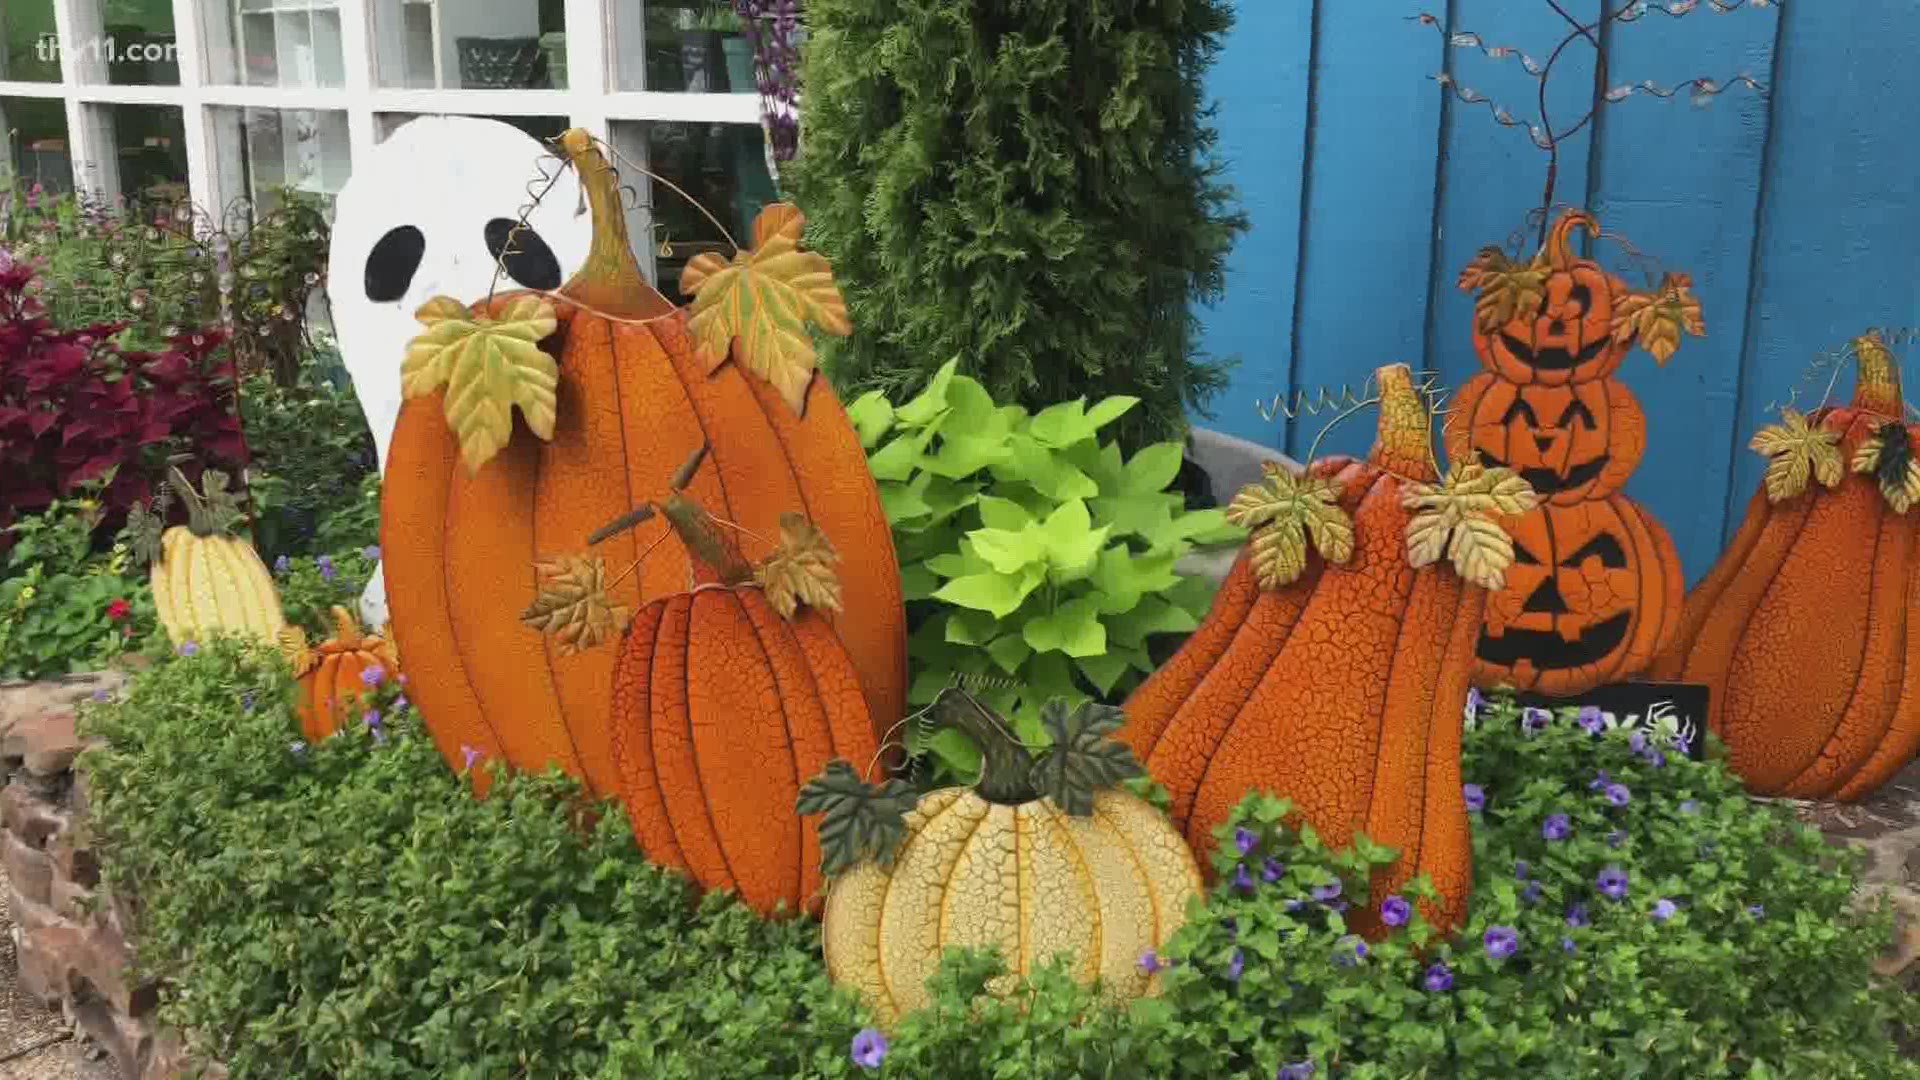 Chris H. Olsen teaches you how to create a pumpkin patch at home with metal art pumpkins.